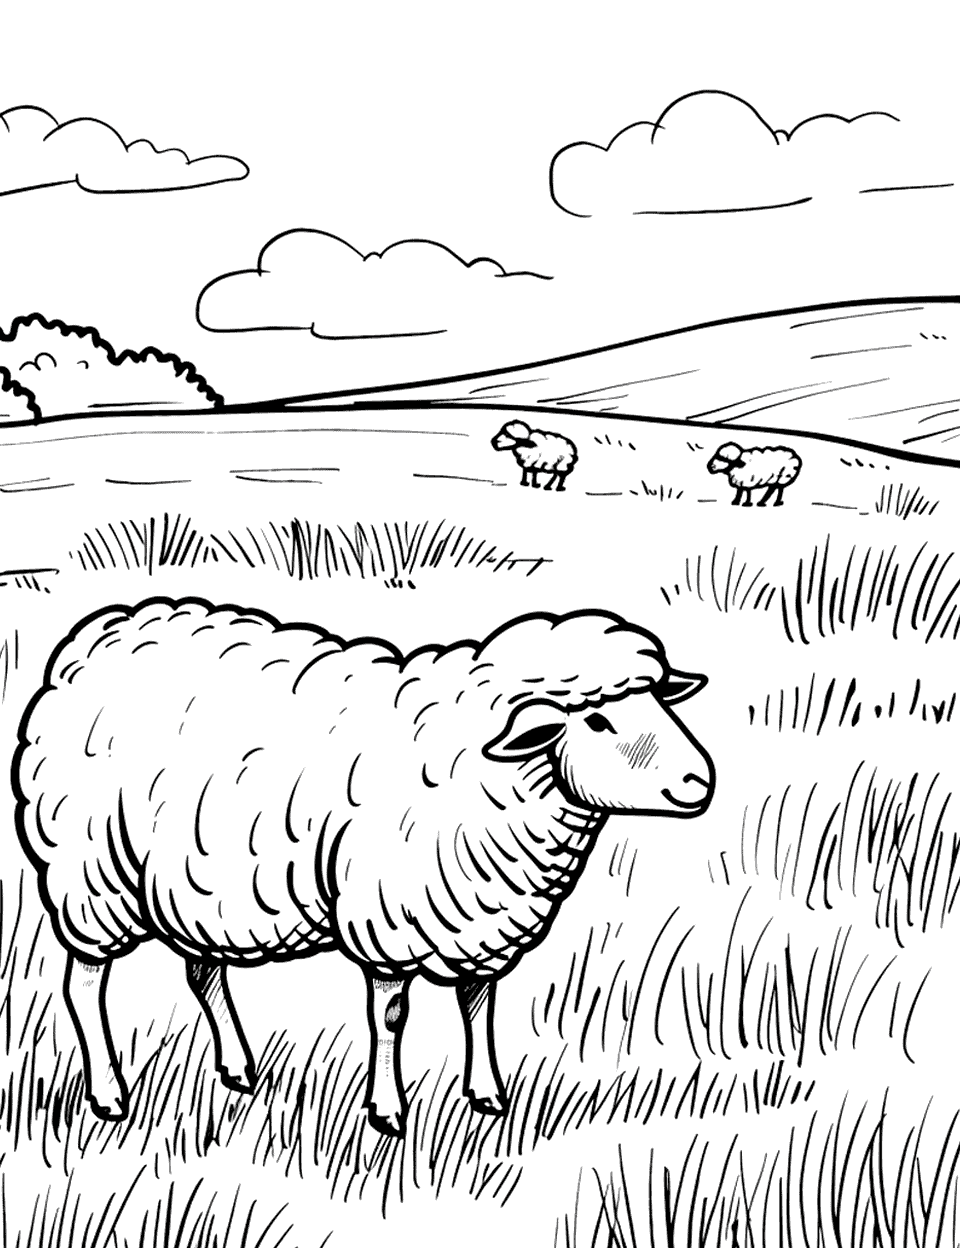 Sheep Grazing with Herd Farm Animal Coloring Page - A peaceful scene of a sheep grazing in a field with the rest of the herd in the background.